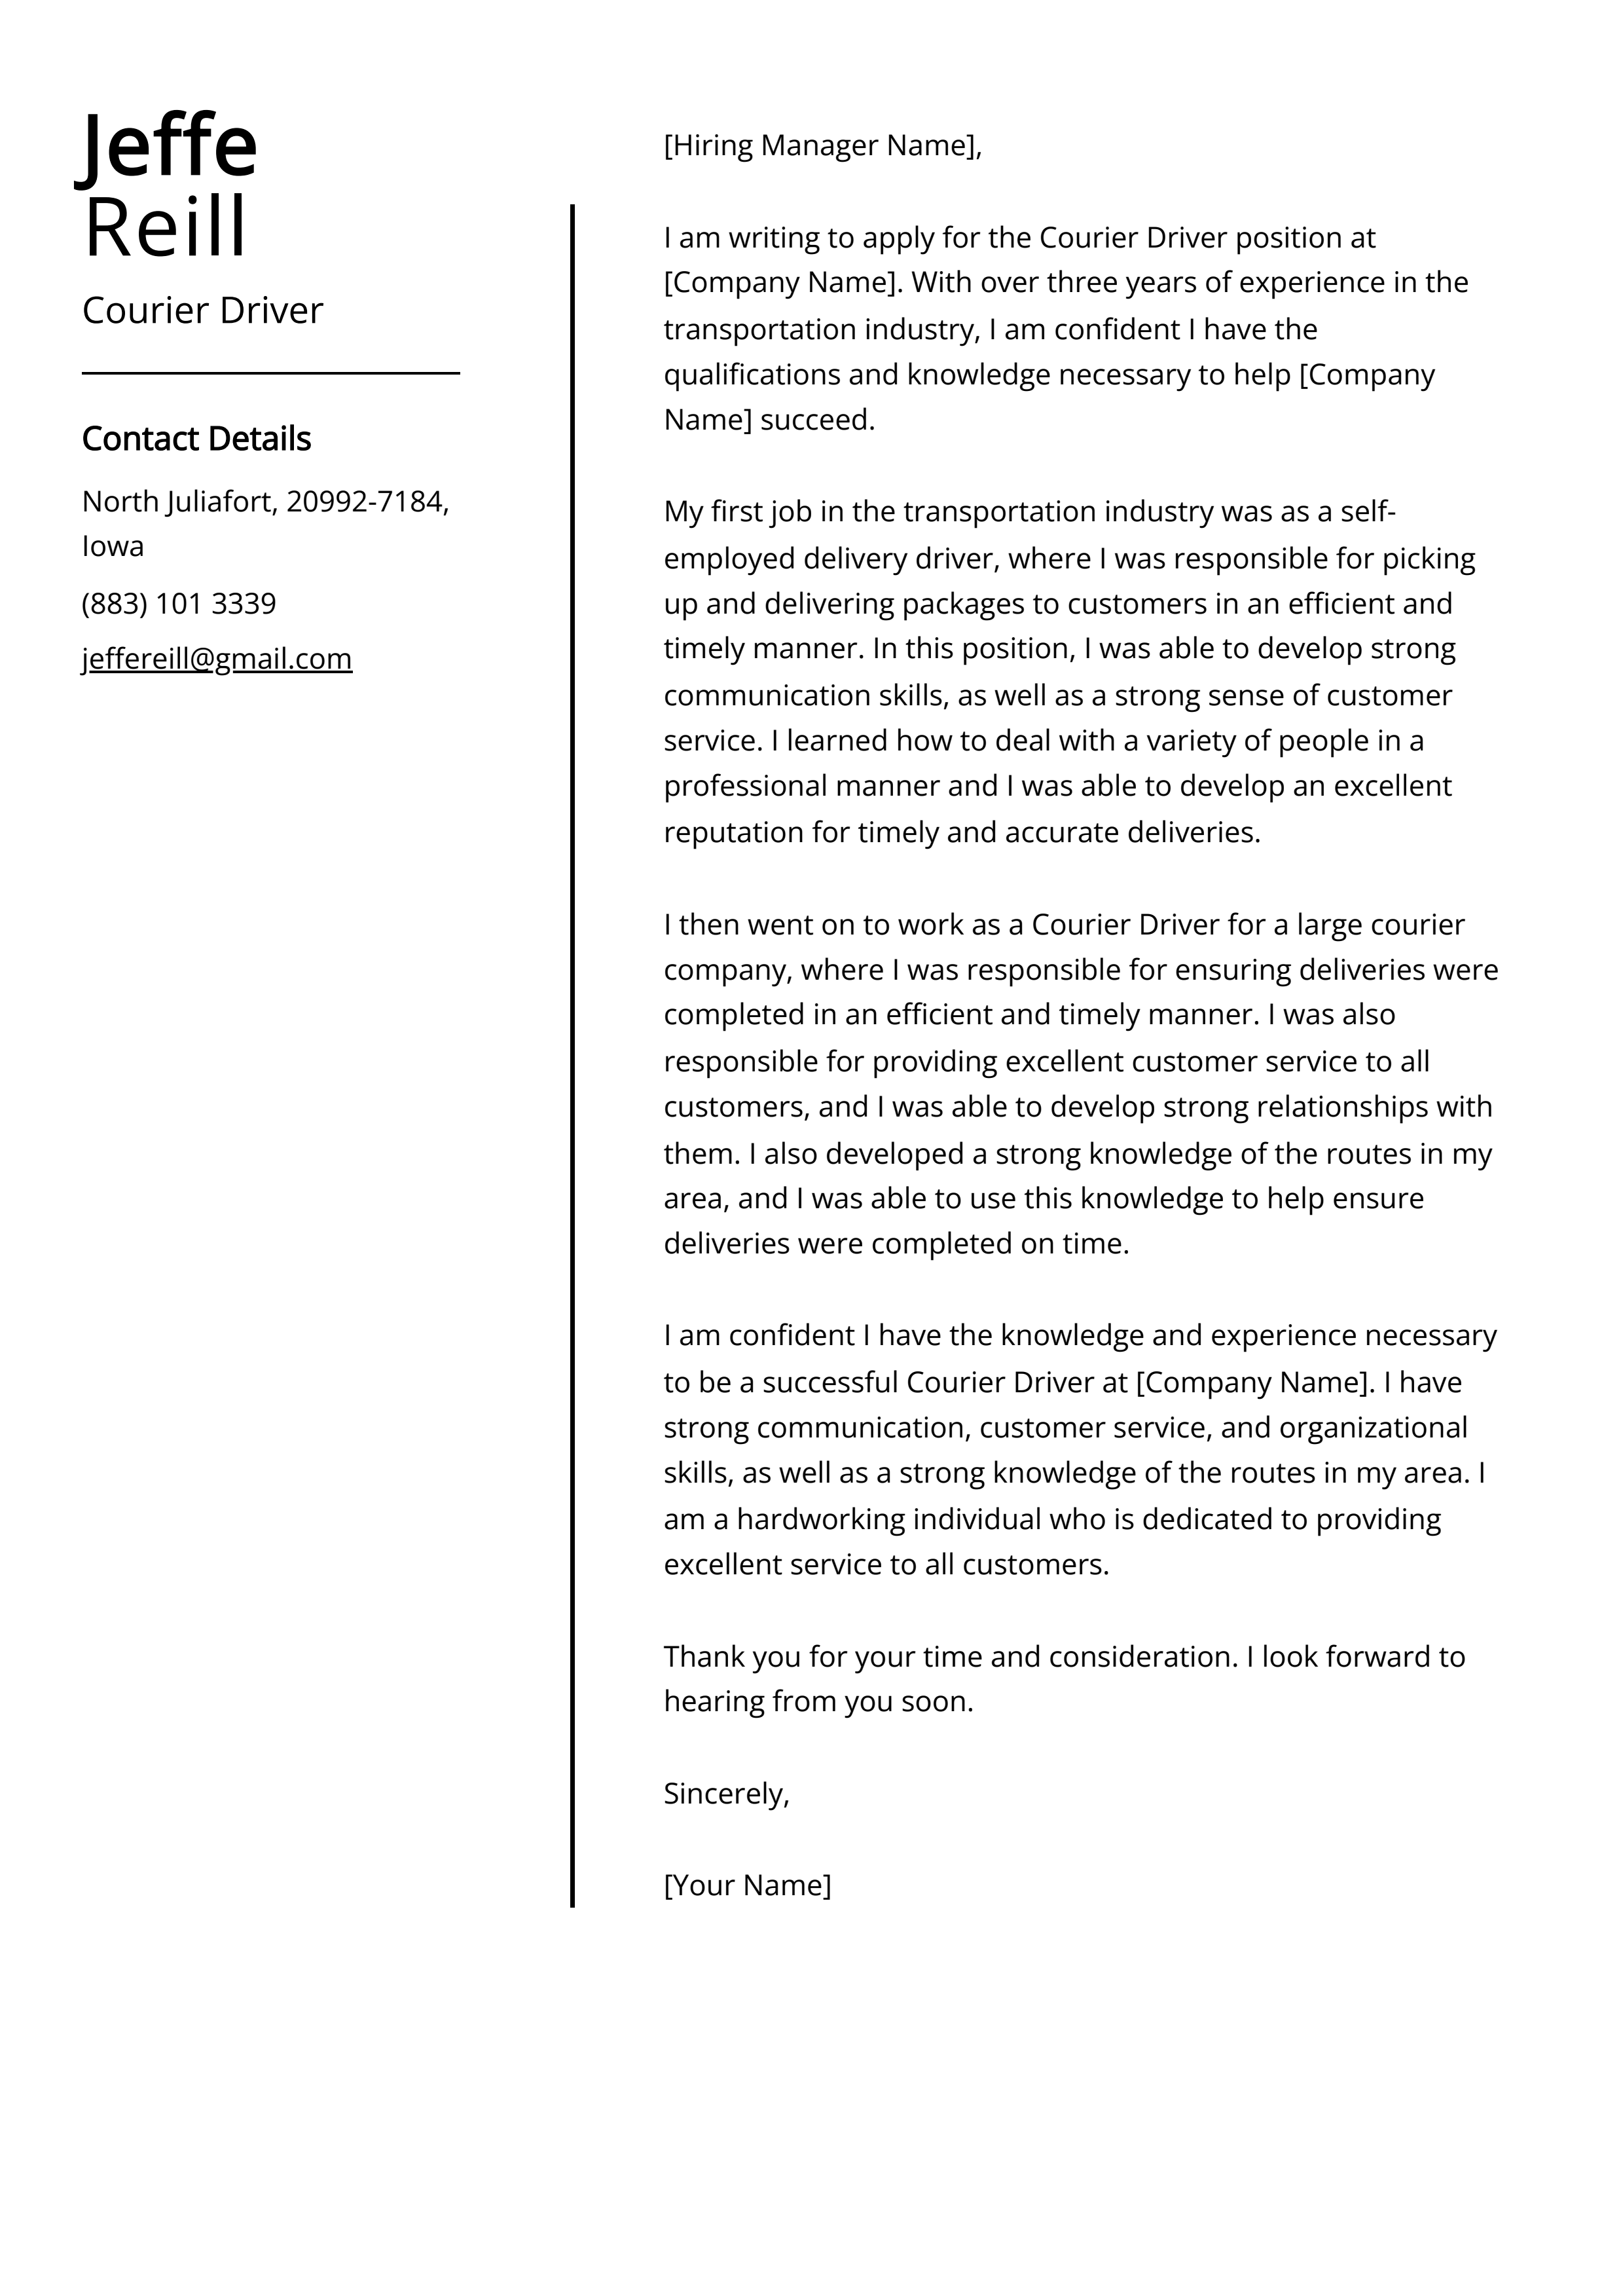 Courier Driver Cover Letter Example